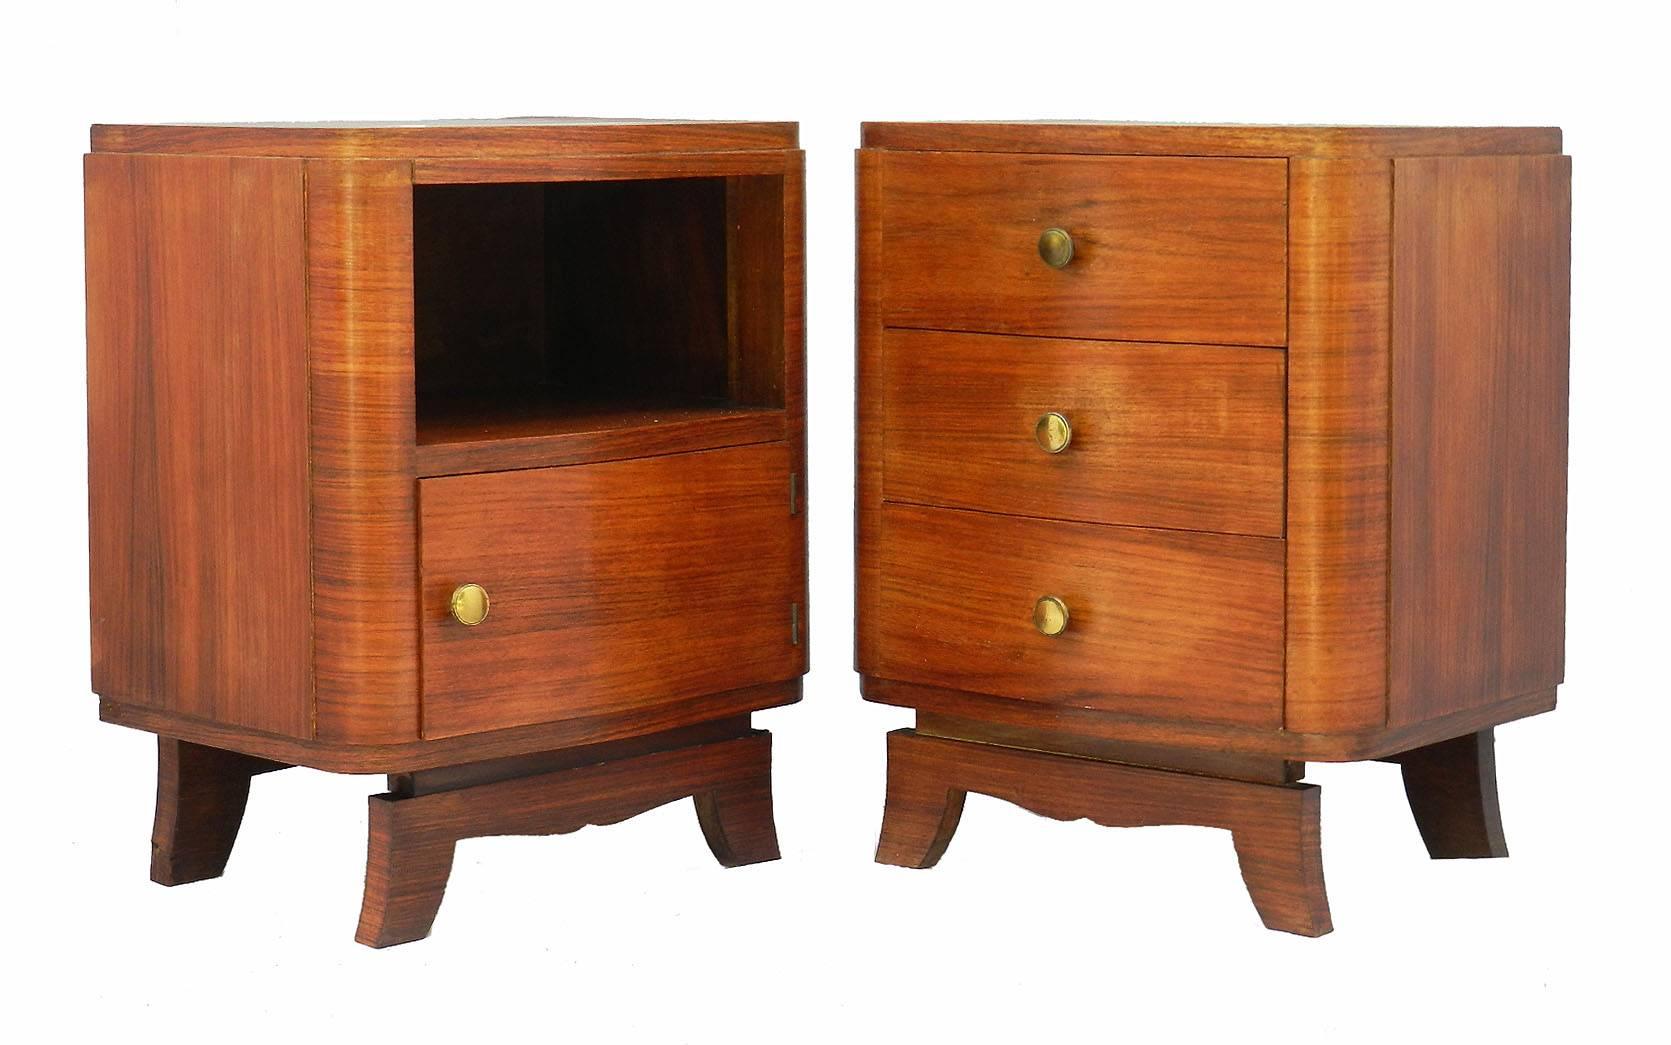 Pair of Art Deco nightstands French side cabinets bedside tables, 1930s
Walnut
Good condition with minor signs of use for their age
We offer a global parcel and a door to door freight service as well as 1stdibs delivery service. Please contact us